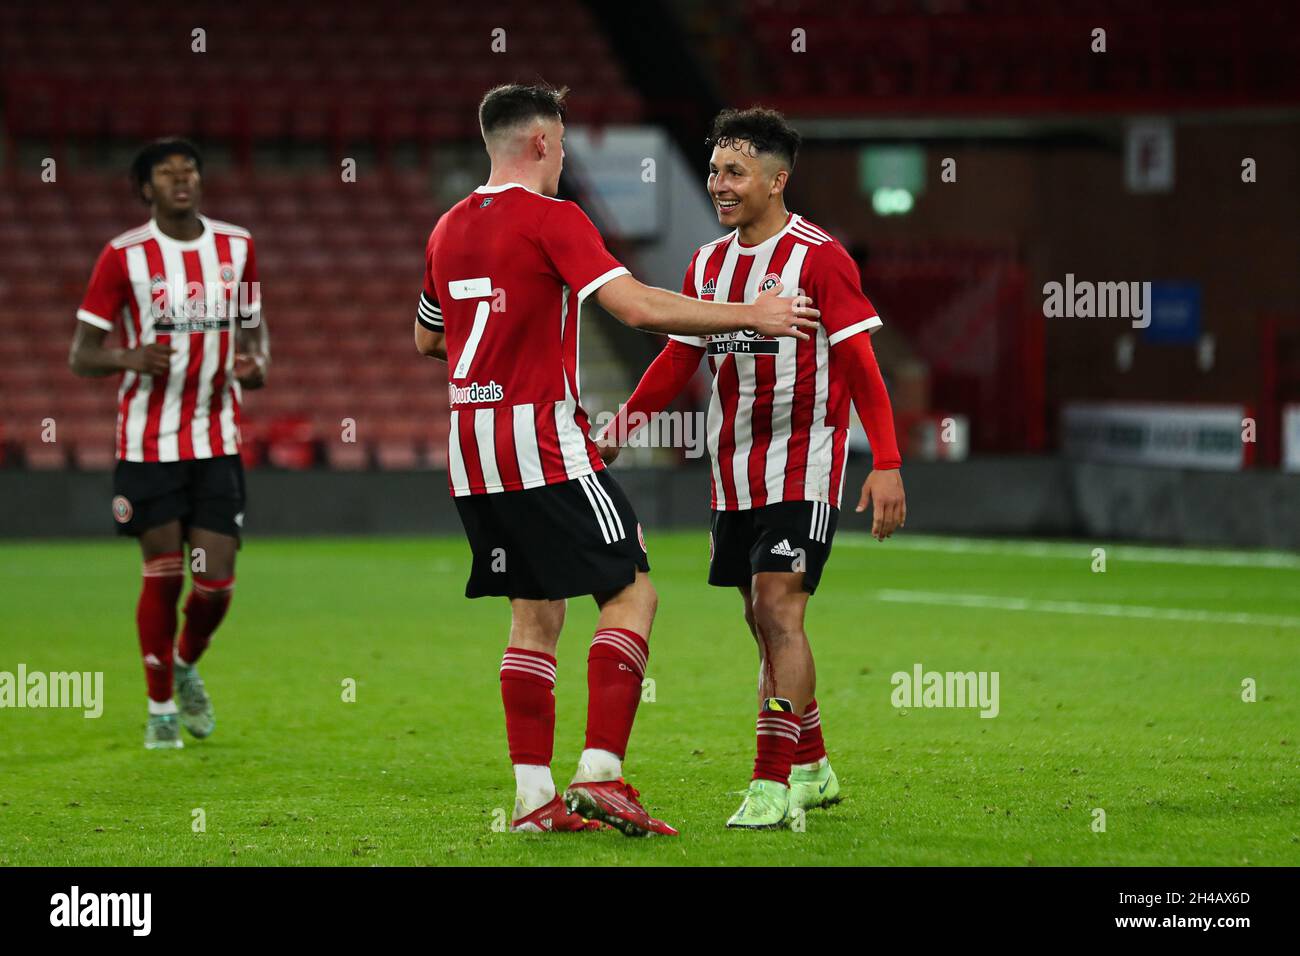 Sheffield, England, 1st November 2021. Angelo Cappello of Sheffield United  (r) scores their side's third goal of the game during the Professional  Development League match at Bramall Lane, Sheffield. Picture credit should